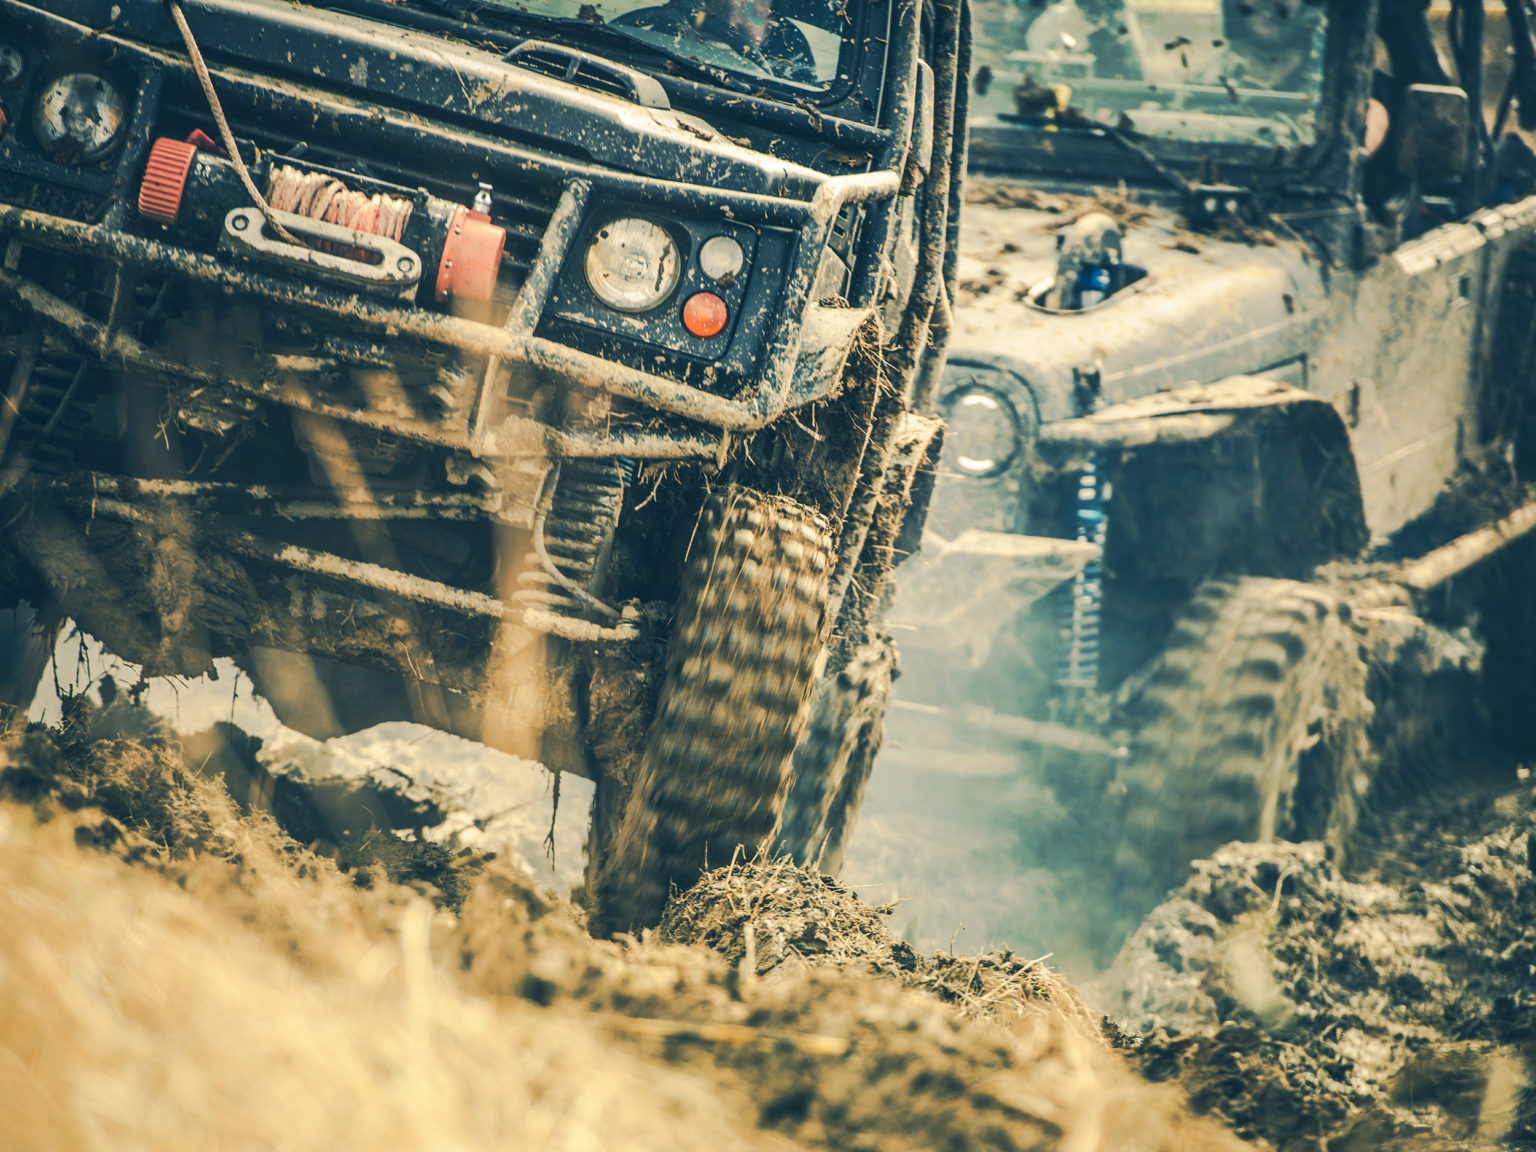 Before you hit the trail, you'll want to follow these tips to make sure your rig is ready.